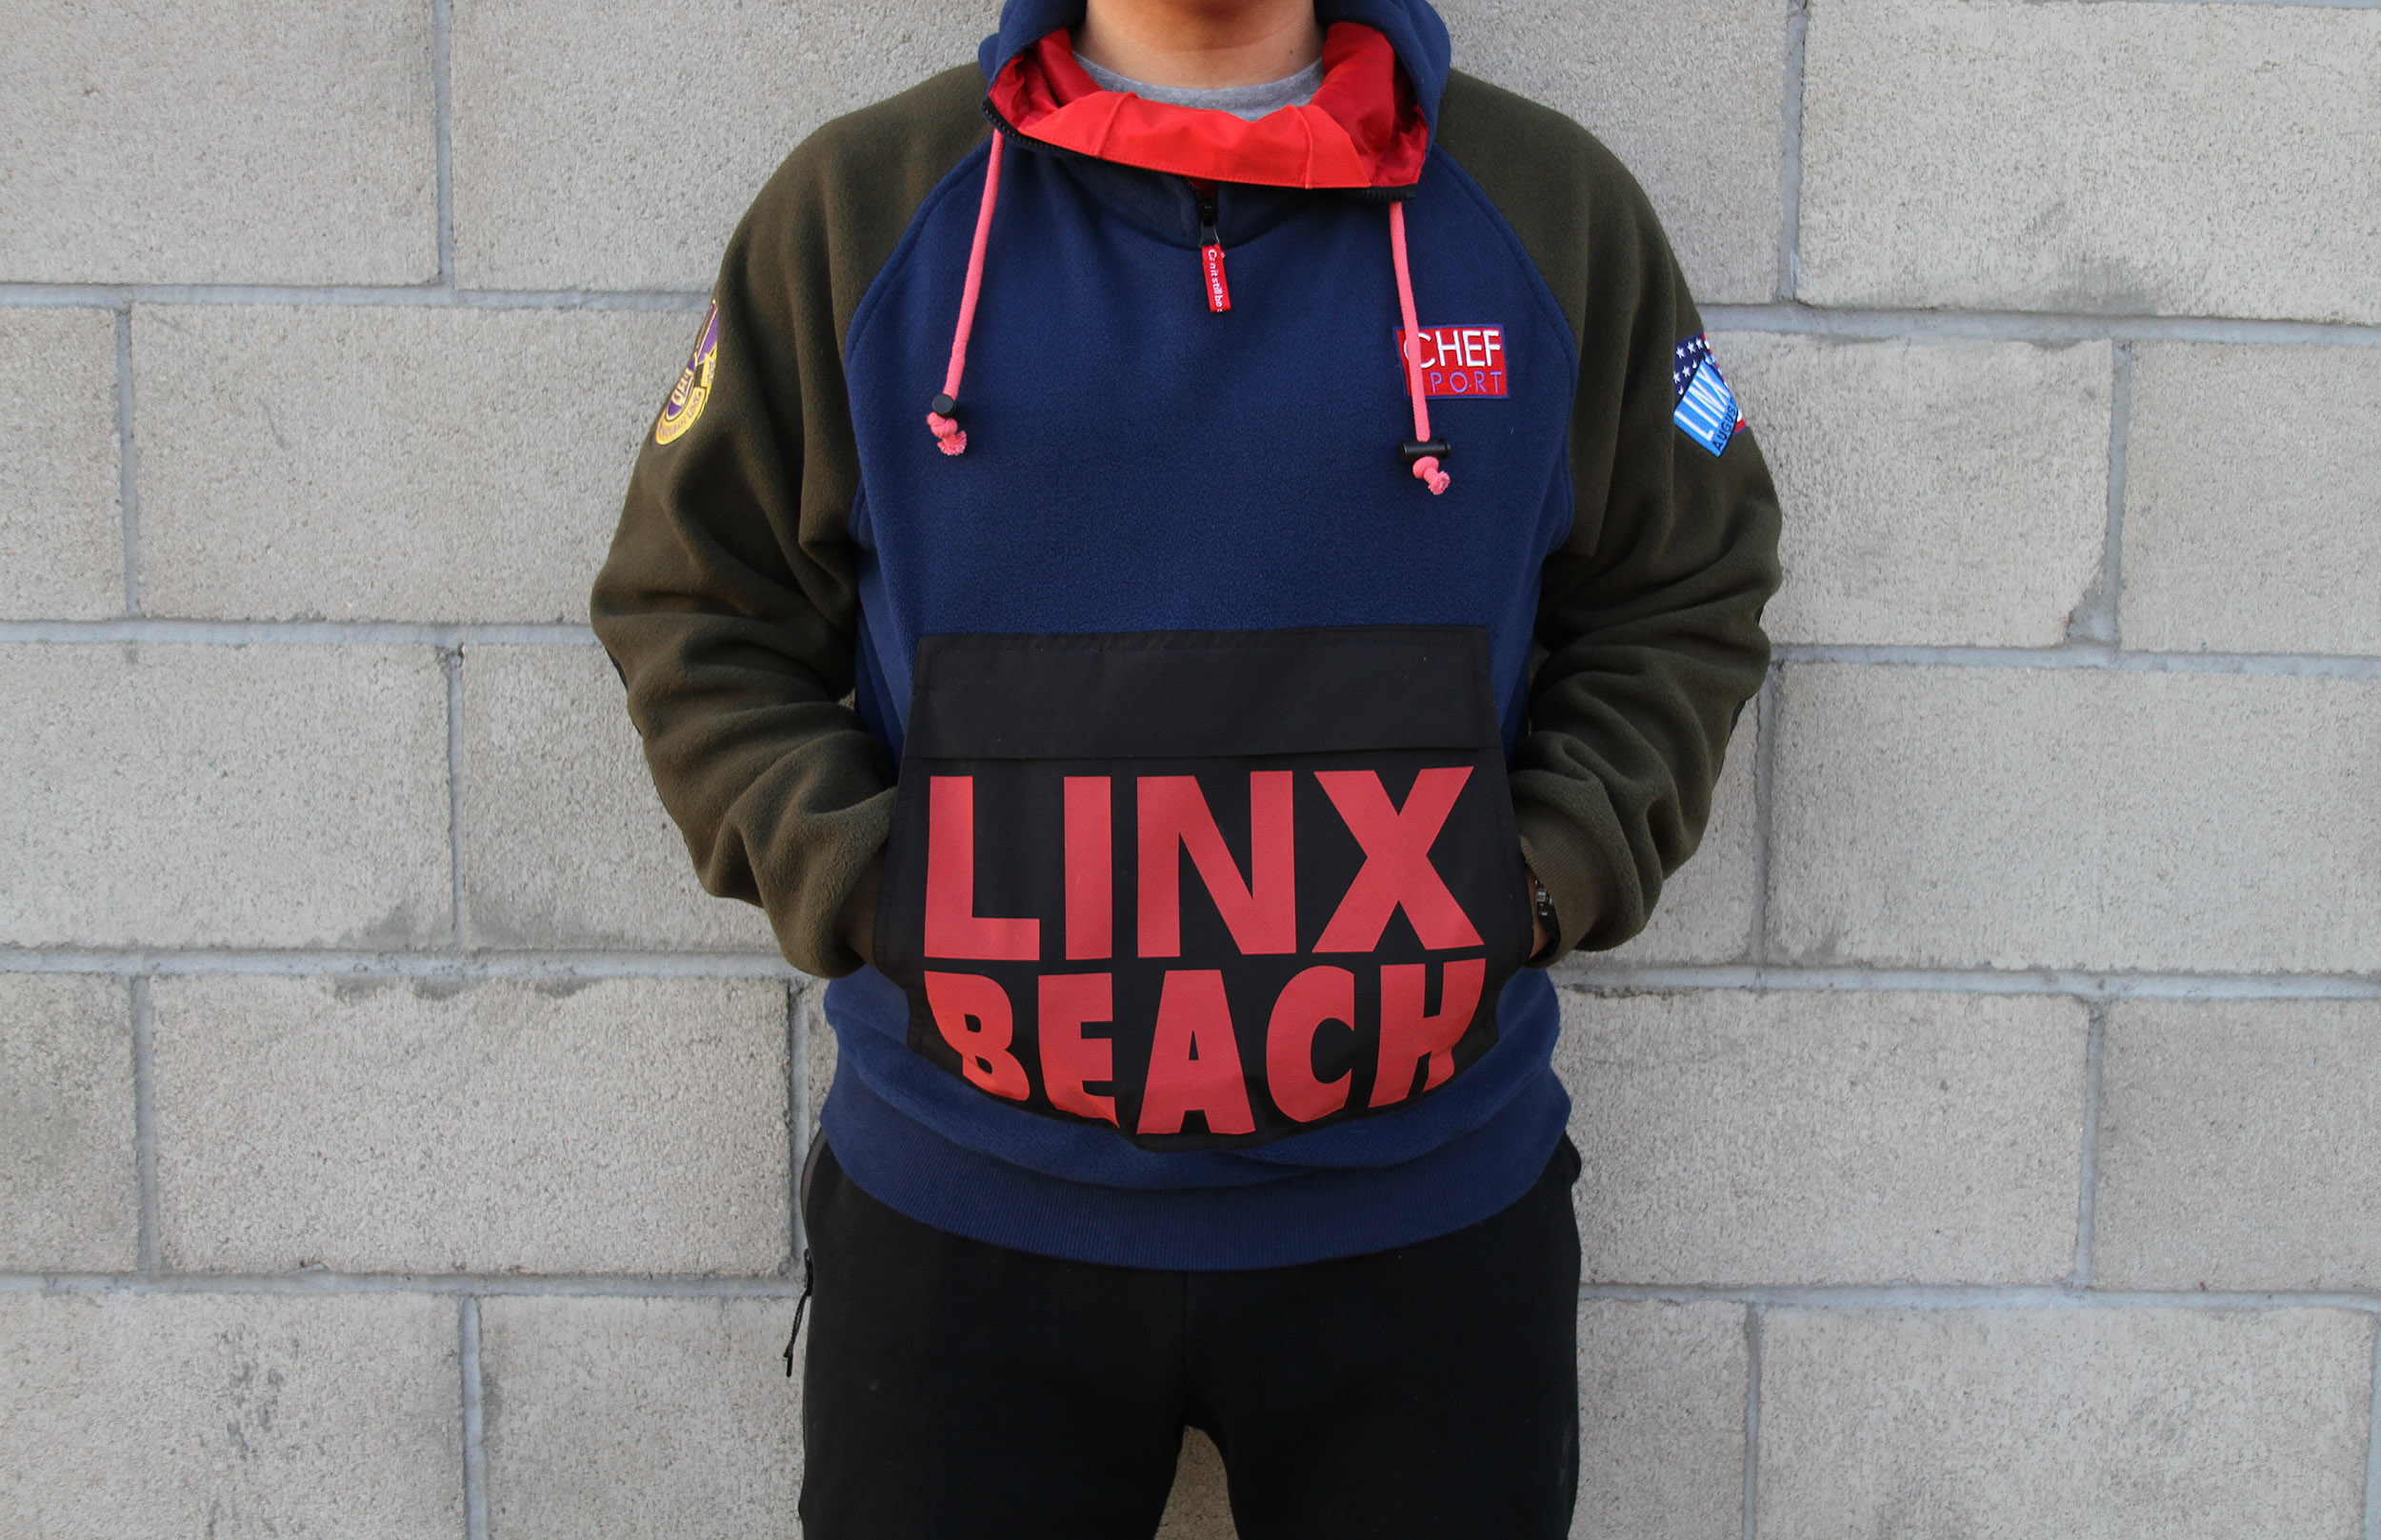 Linx Beach: The New Standard for Outerwear